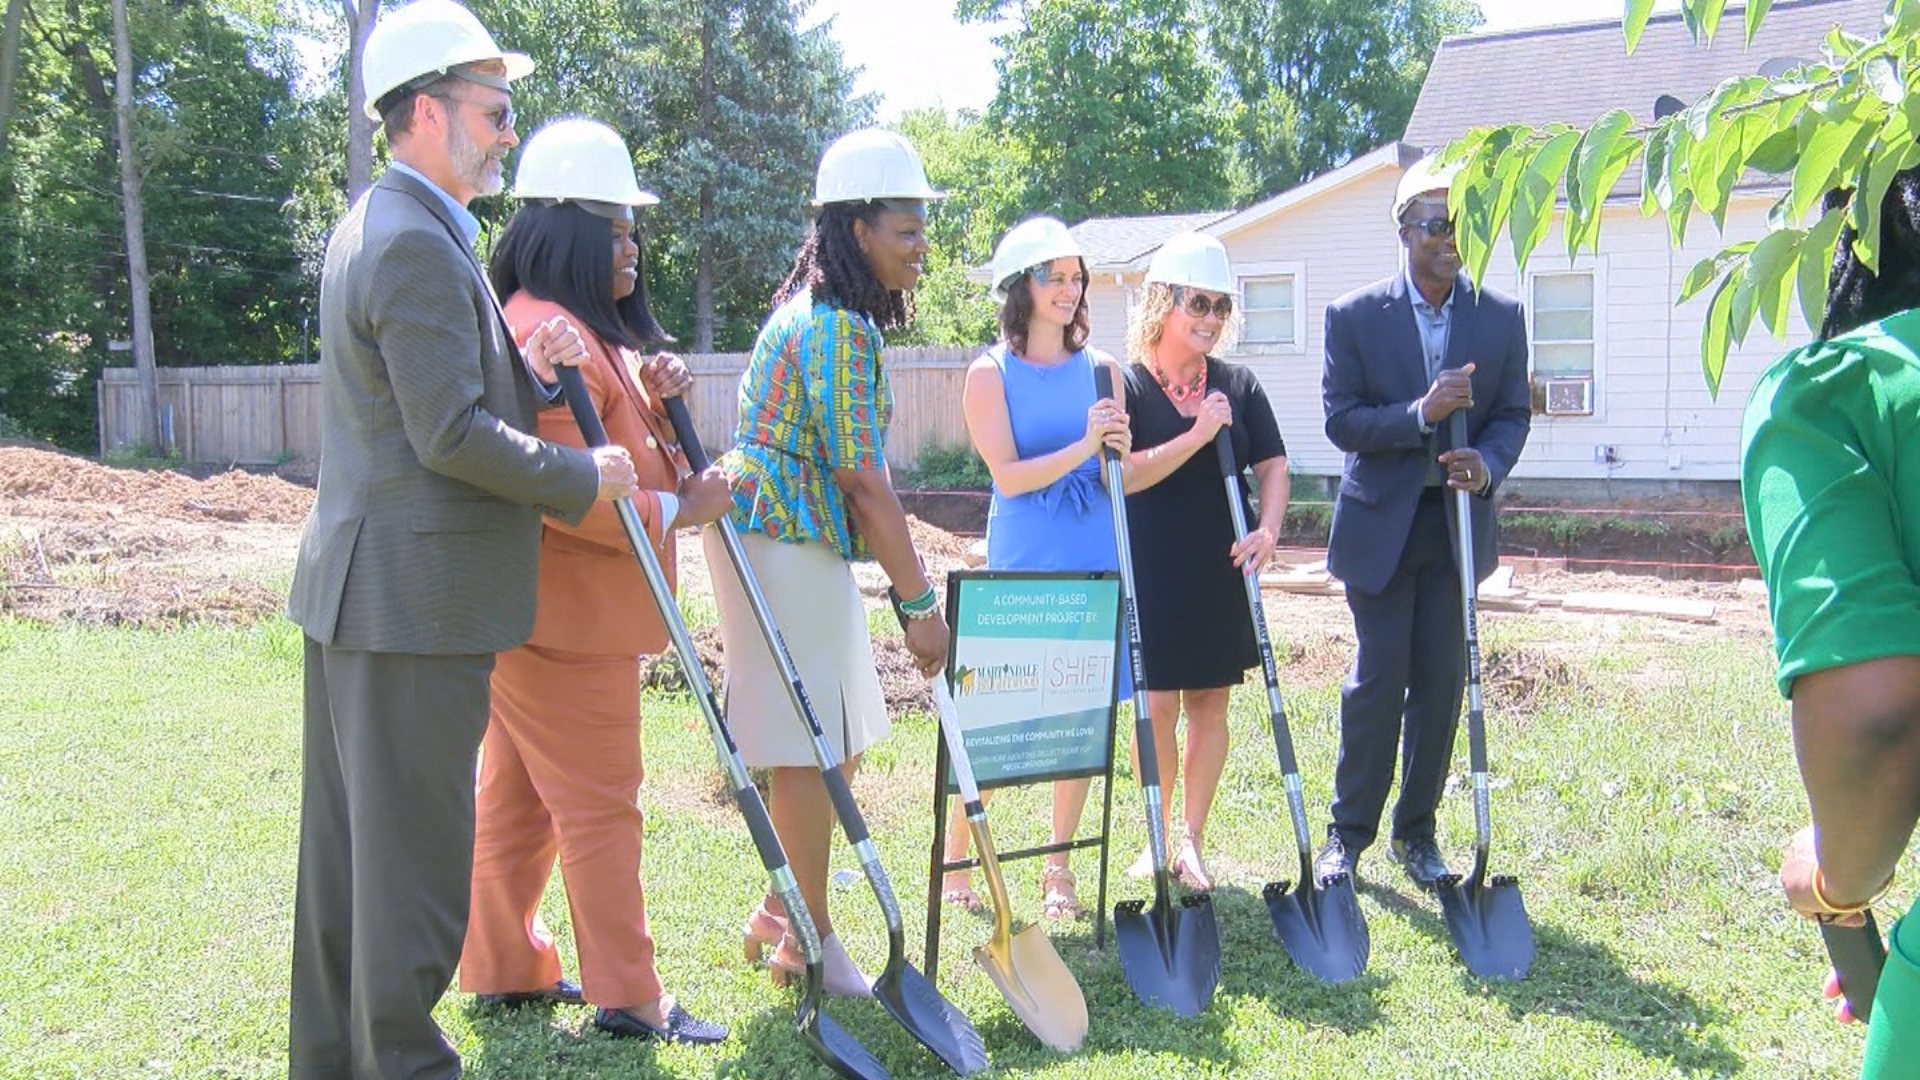 Martindale-Brightwood leaders break ground on ‘affordable’ townhomes